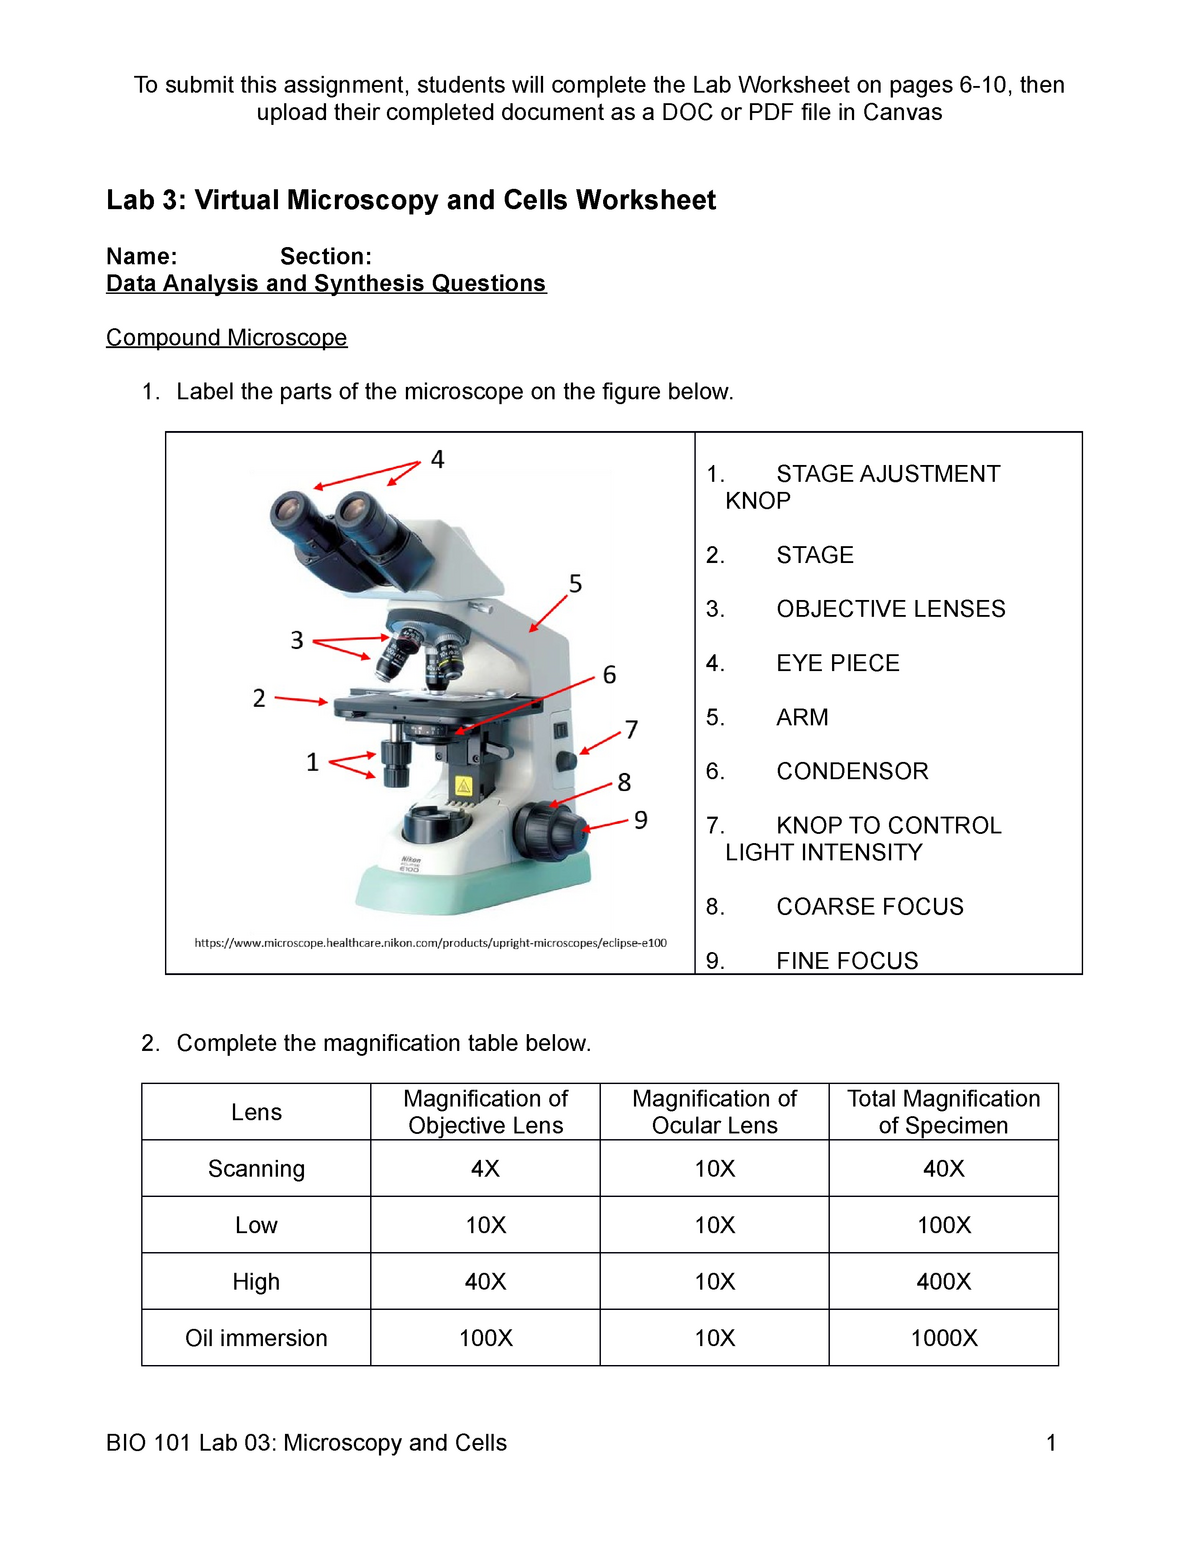 bio-101-lab-03-microscopy-and-cells-original-upload-their-completed-document-as-a-doc-or-pdf